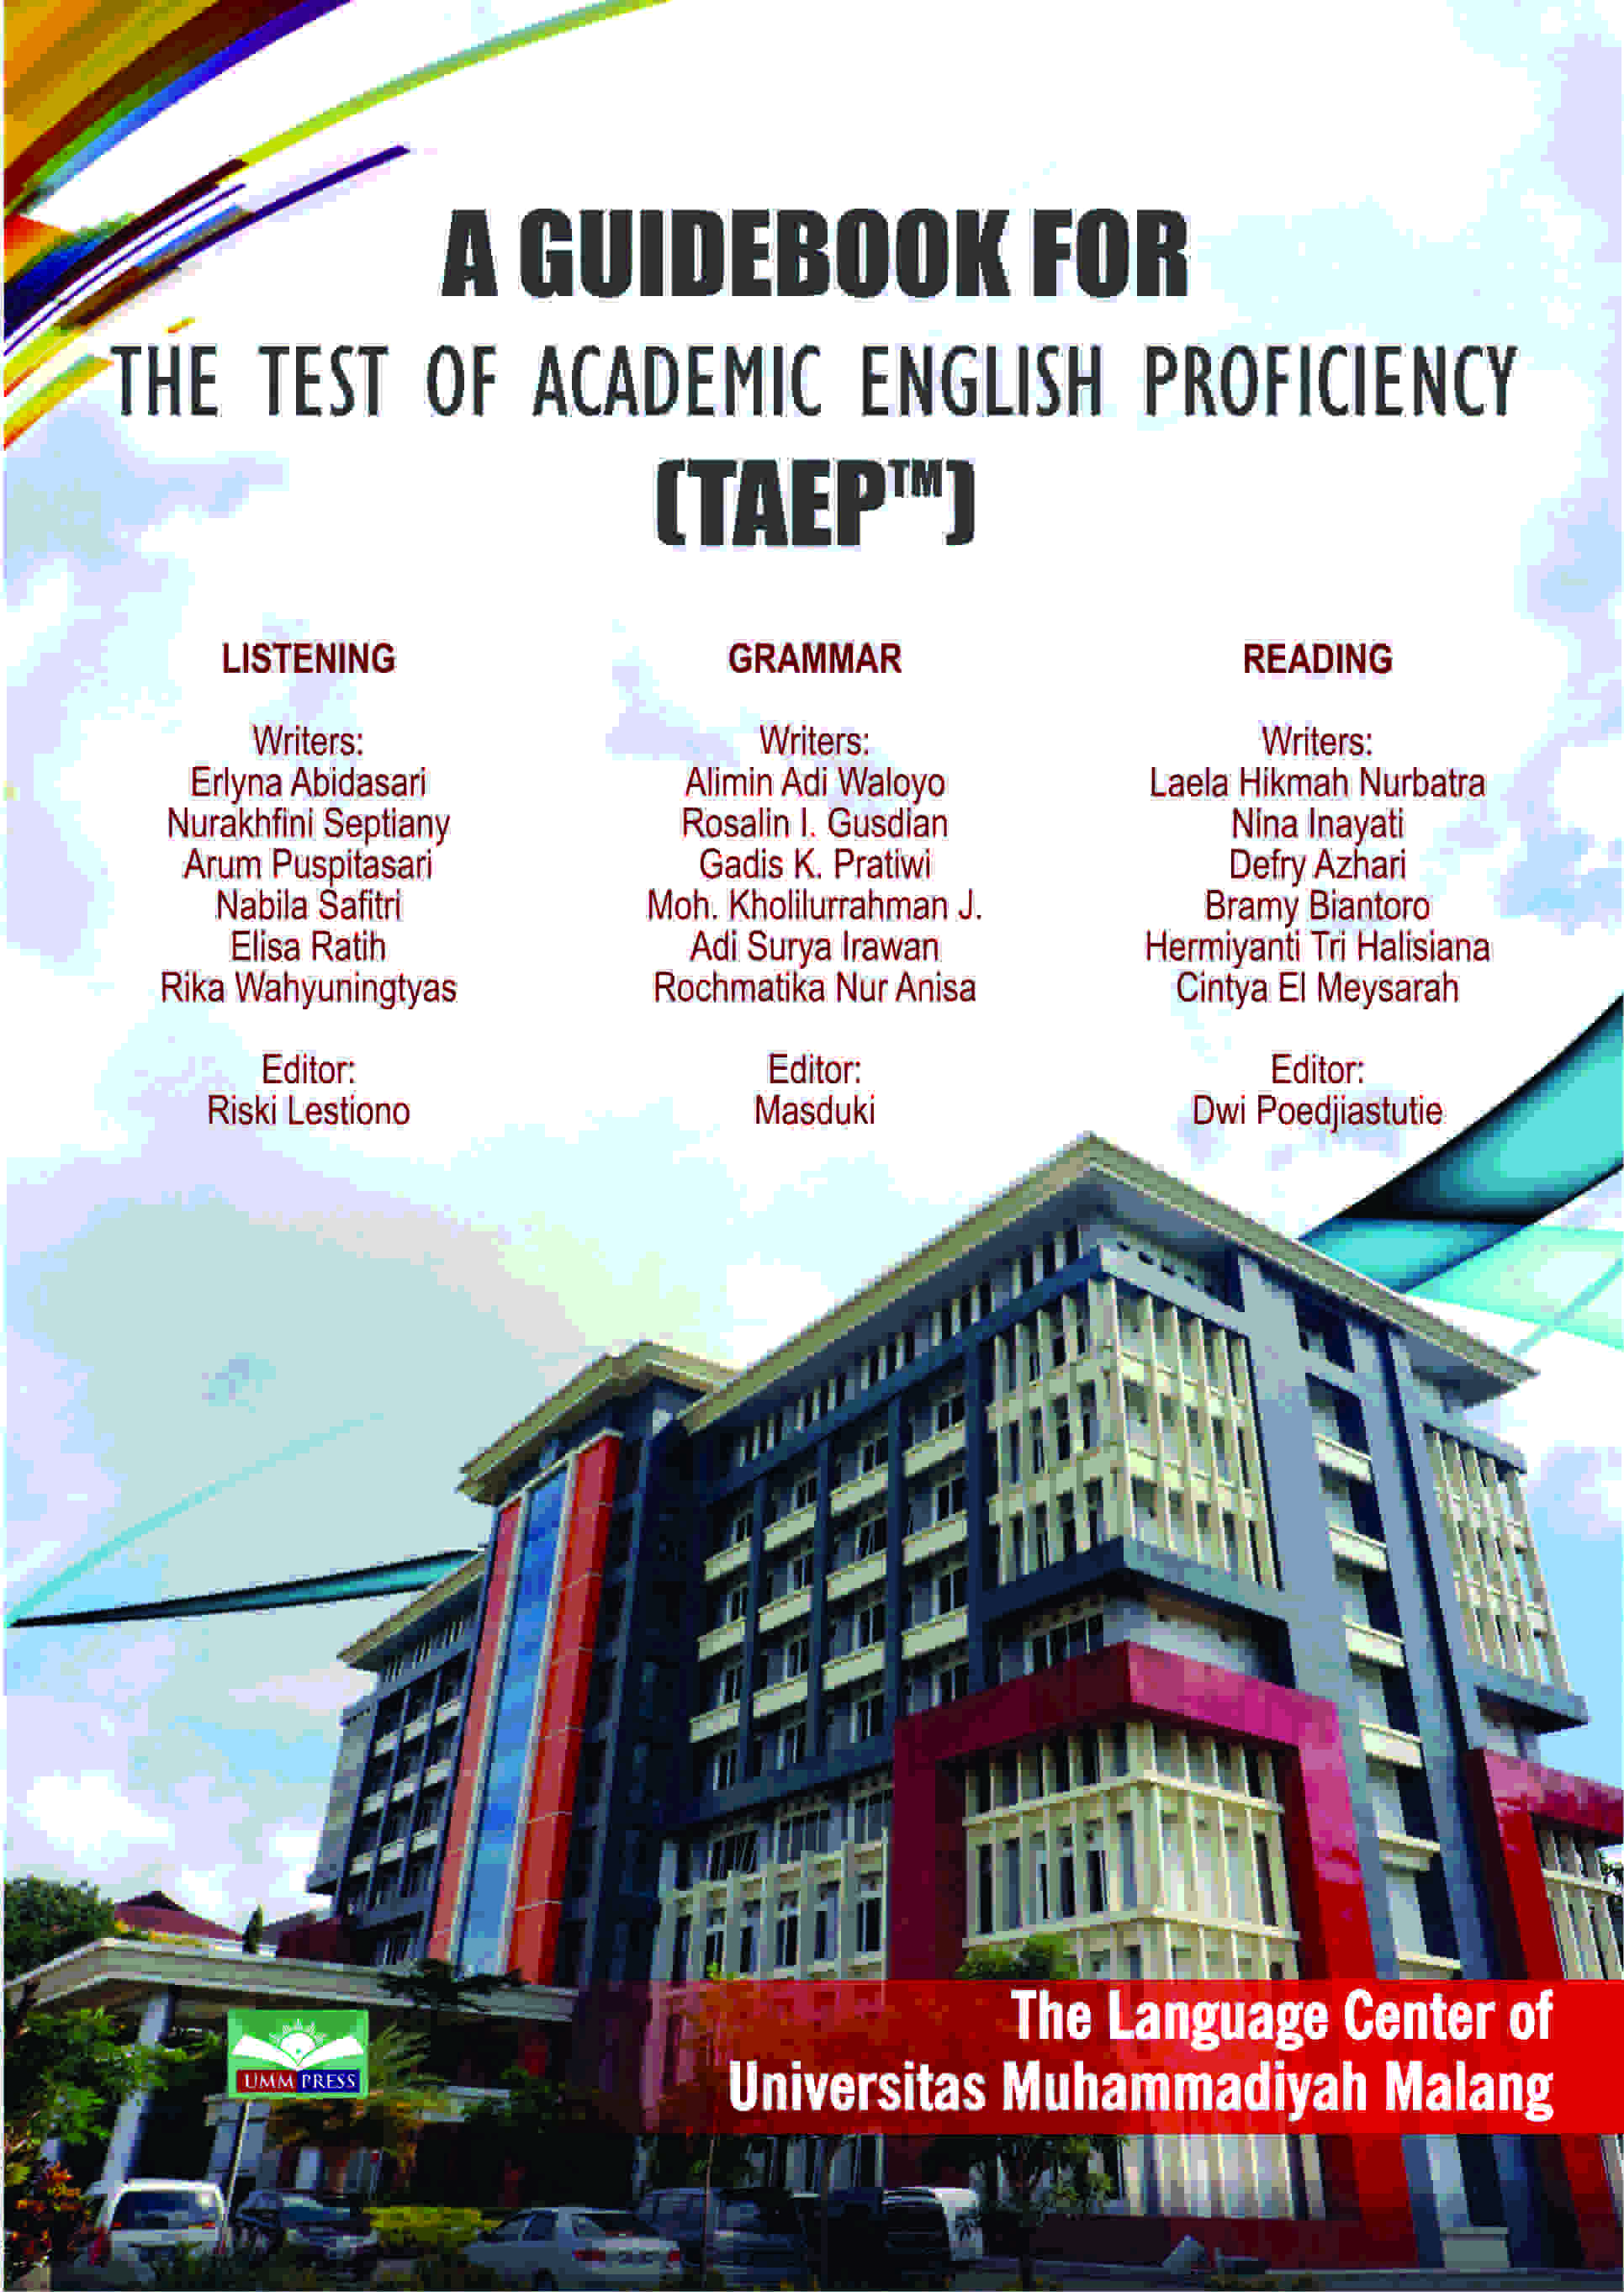 a-guide-book-for-the-test-of-academic-english-proficiency-taep-tm